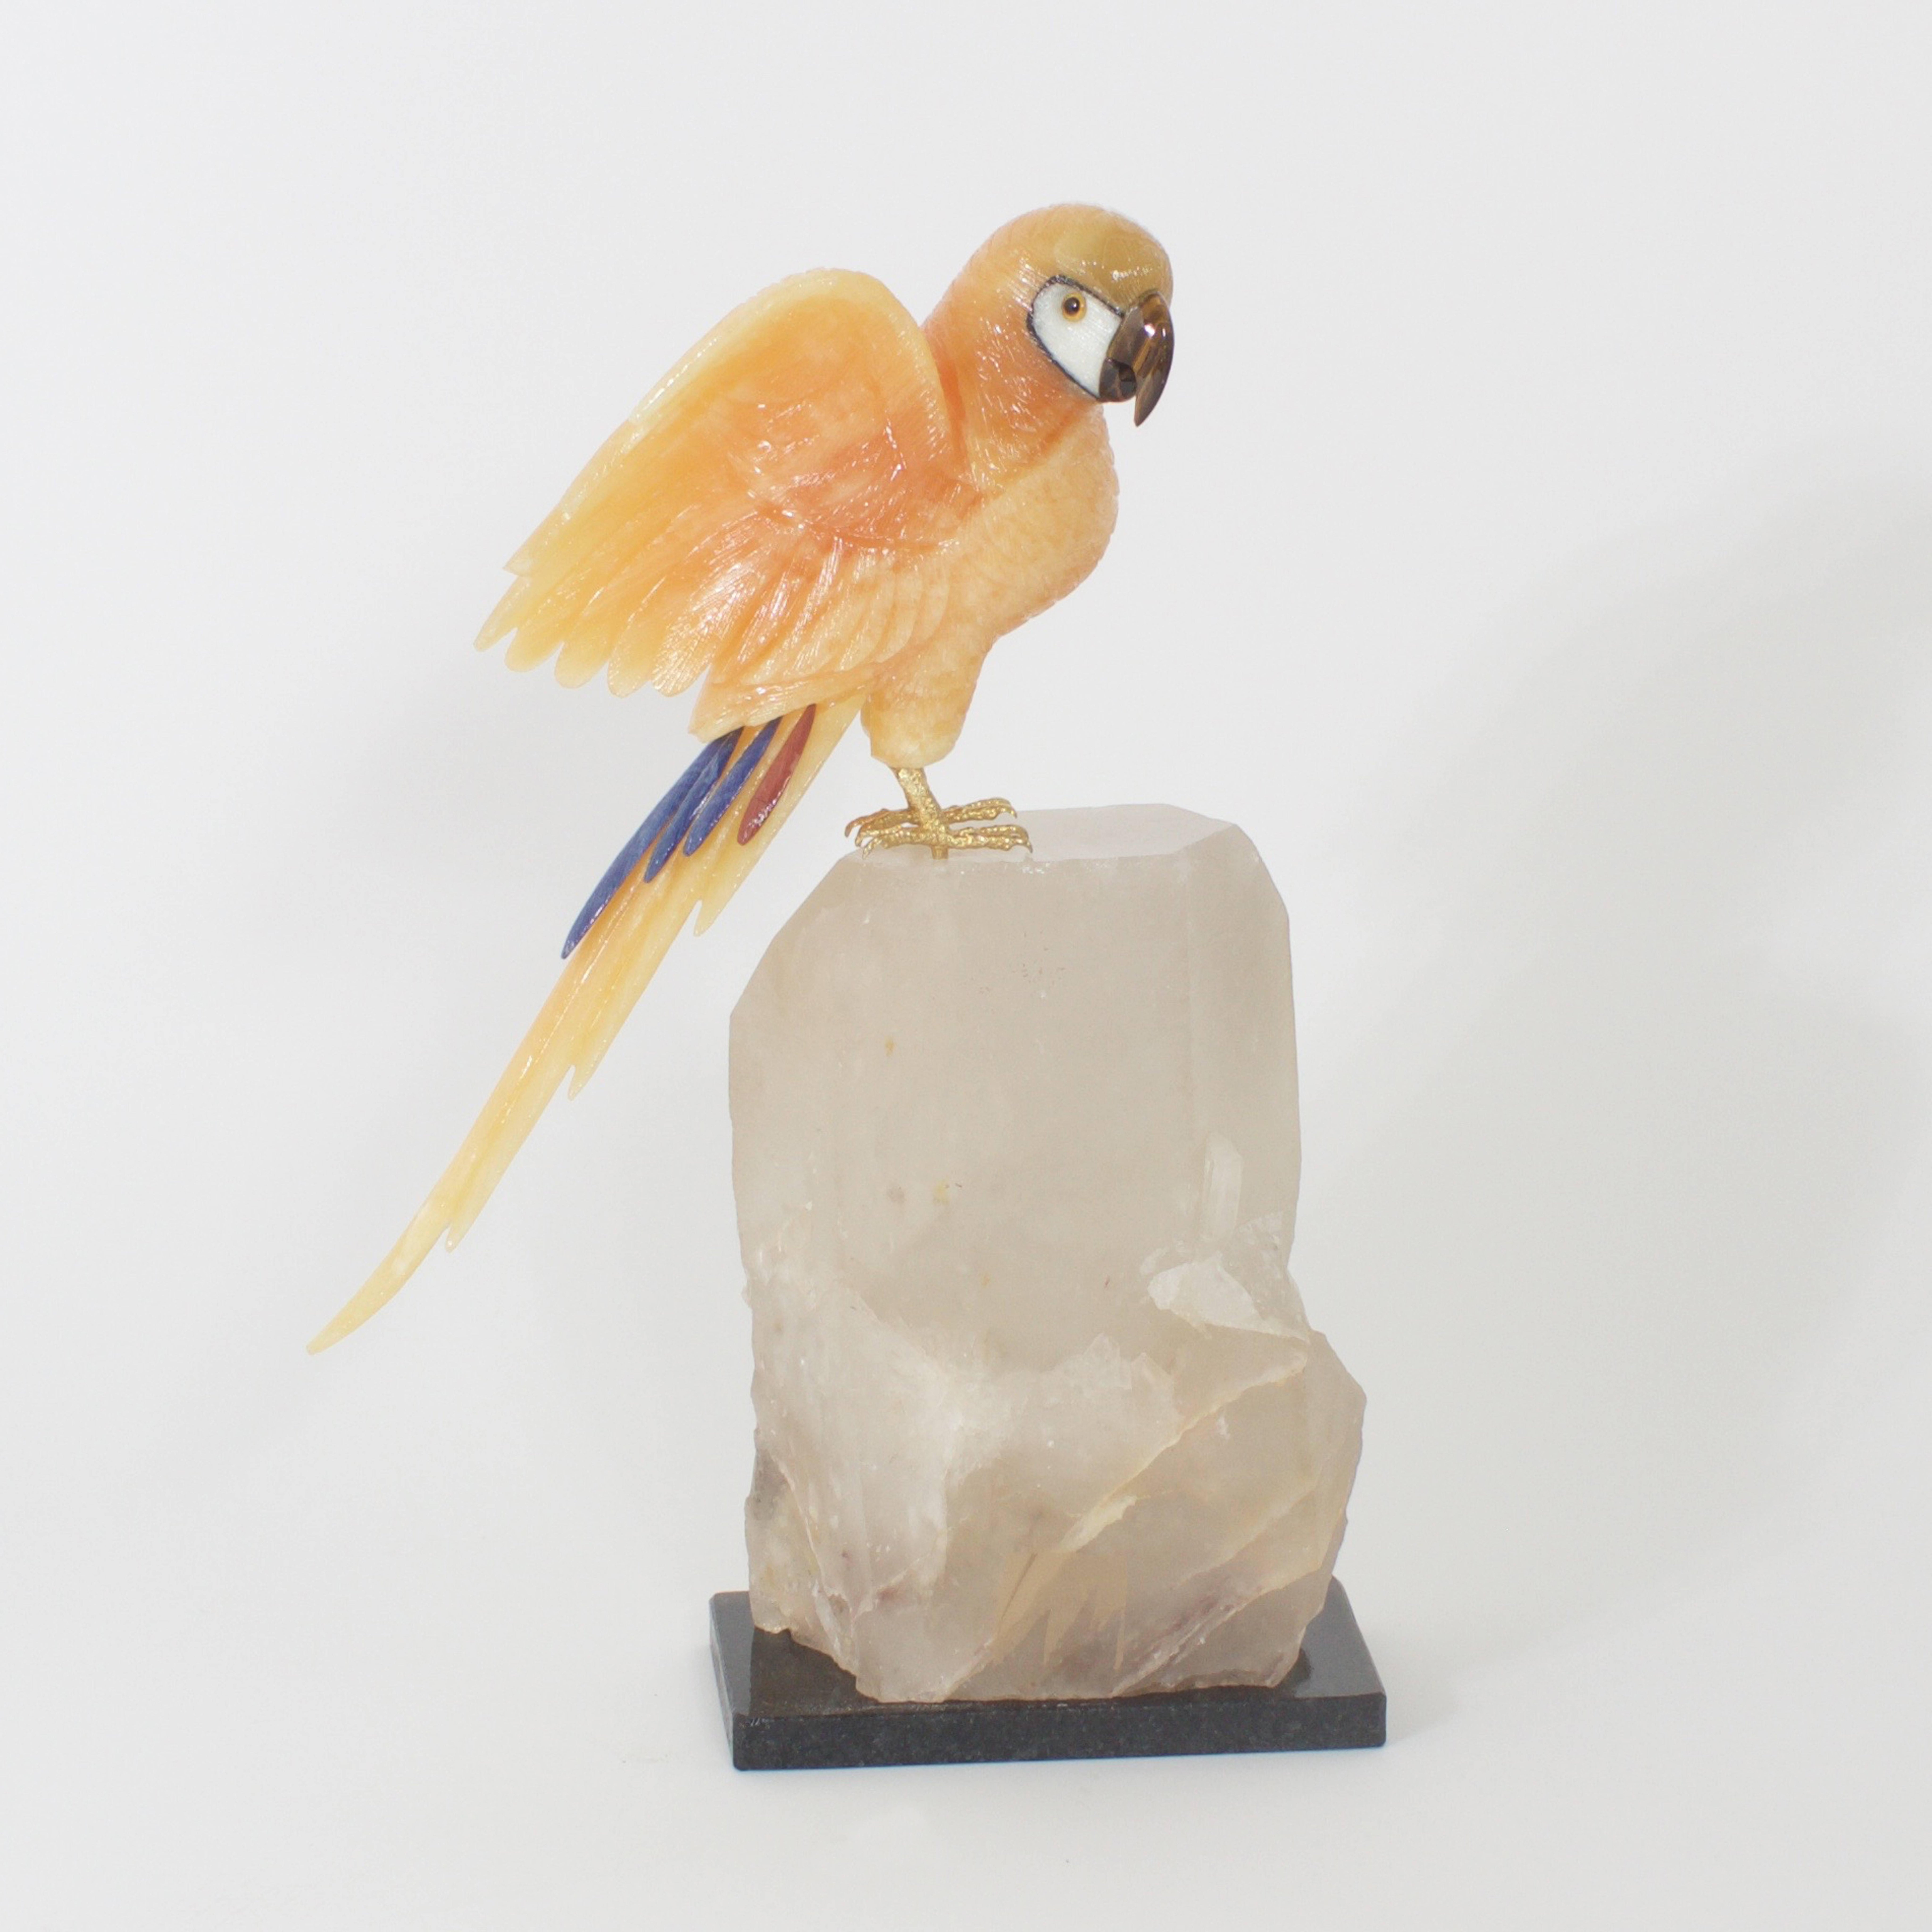 Three stunning carved stone birds mounted on Quartz specimens. The two orange parrots are carved from orange Calcite and trimmed in Lapis. The cockatoo is (sold). All three birds have tiger eye beaks. These exotic birds are brilliant decorative